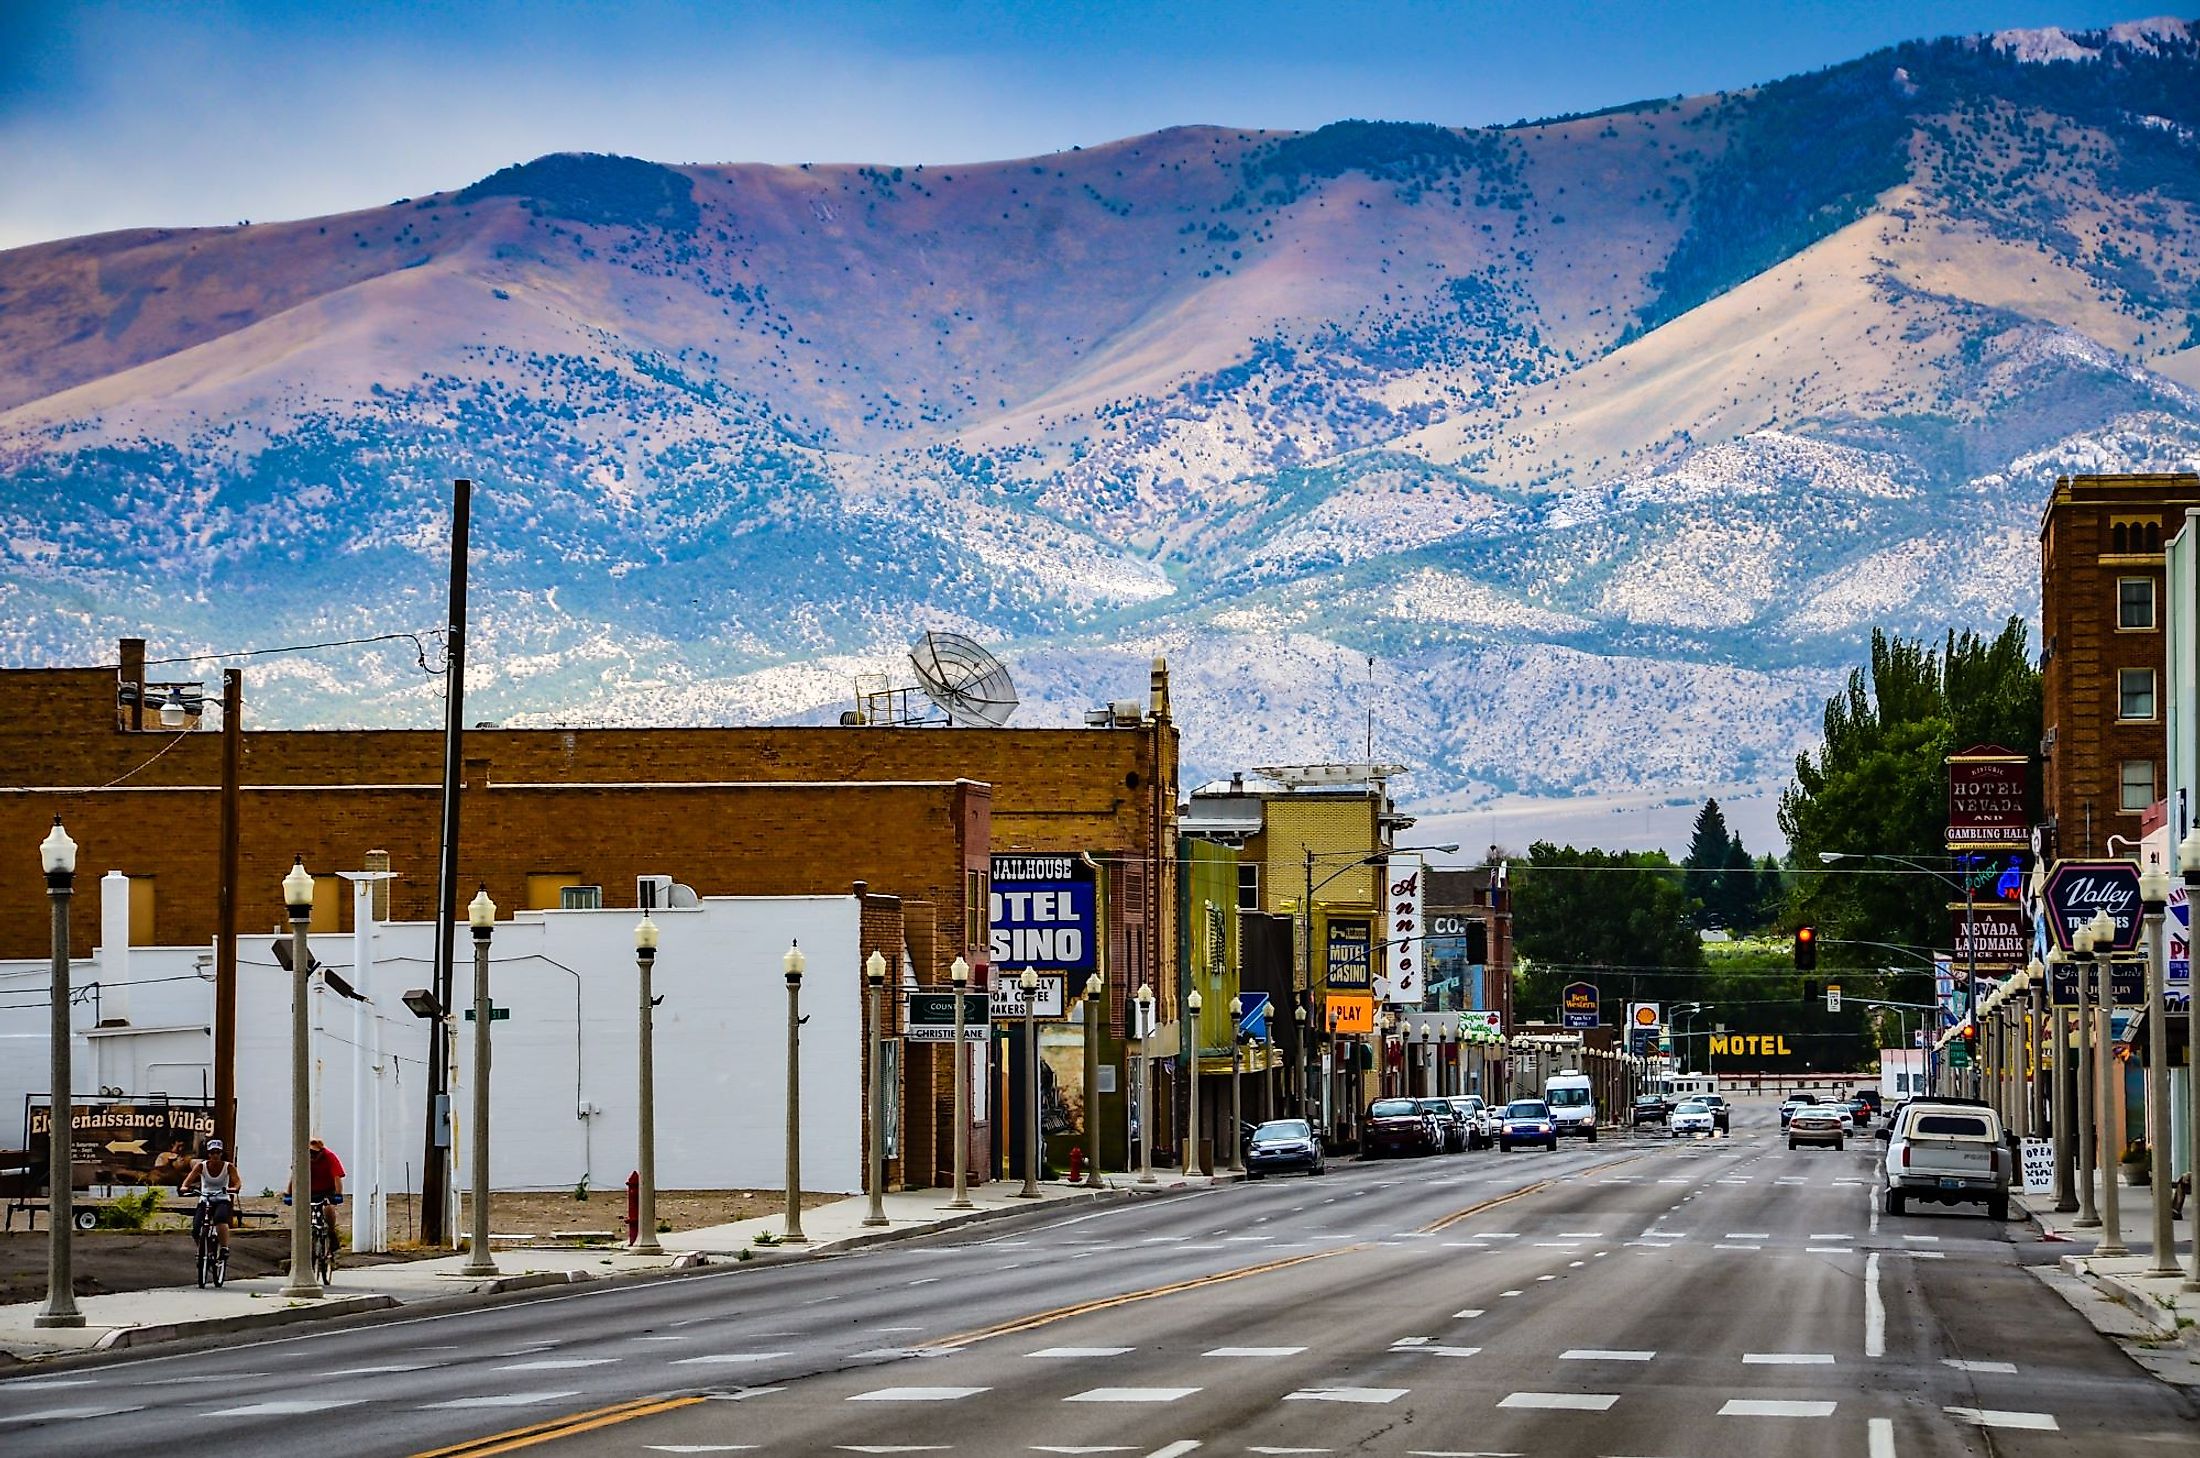 Route 50, the main street in western town of Ely, Nevada is seen against a backdrop of a mountain range. Editorial credit: Sandra Foyt / Shutterstock.com